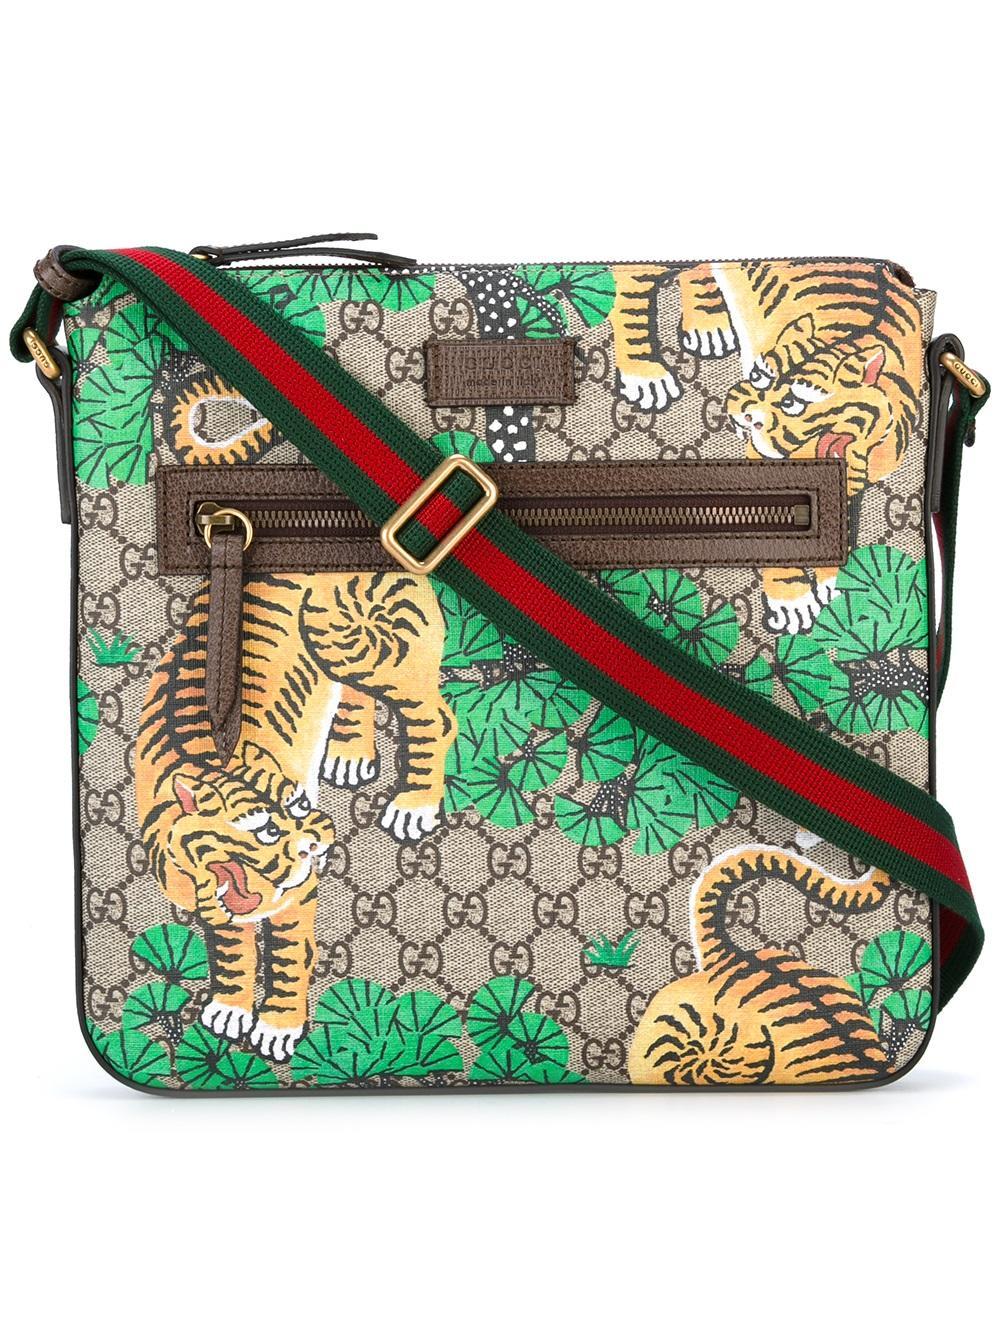 gucci tiger print bag, OFF 73%,welcome 